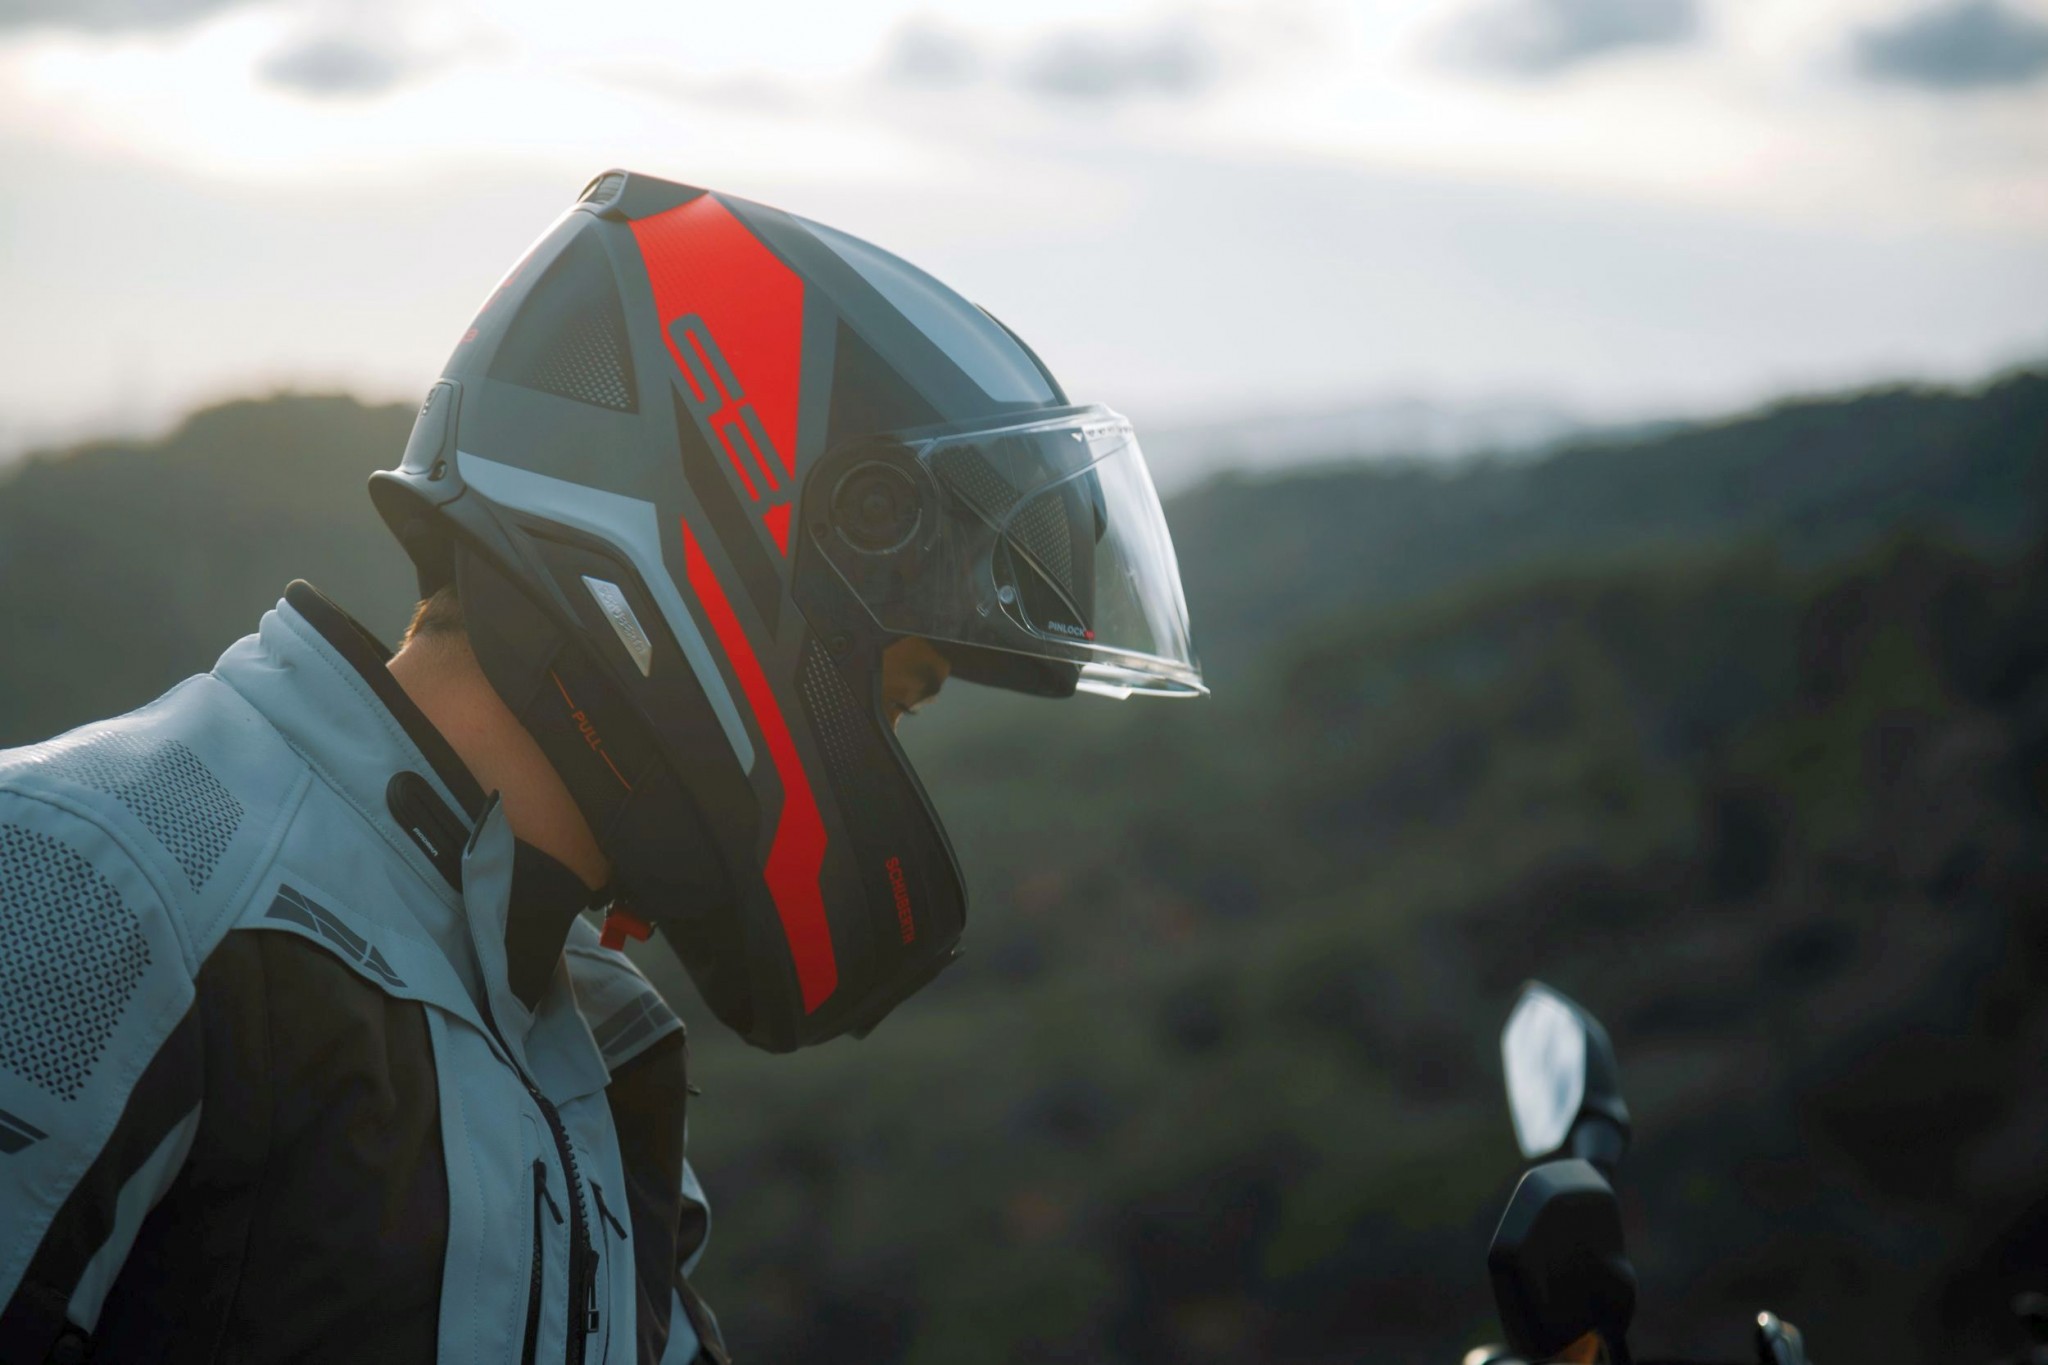 Schuberth S3 sport touring helmet in the test - Image 42